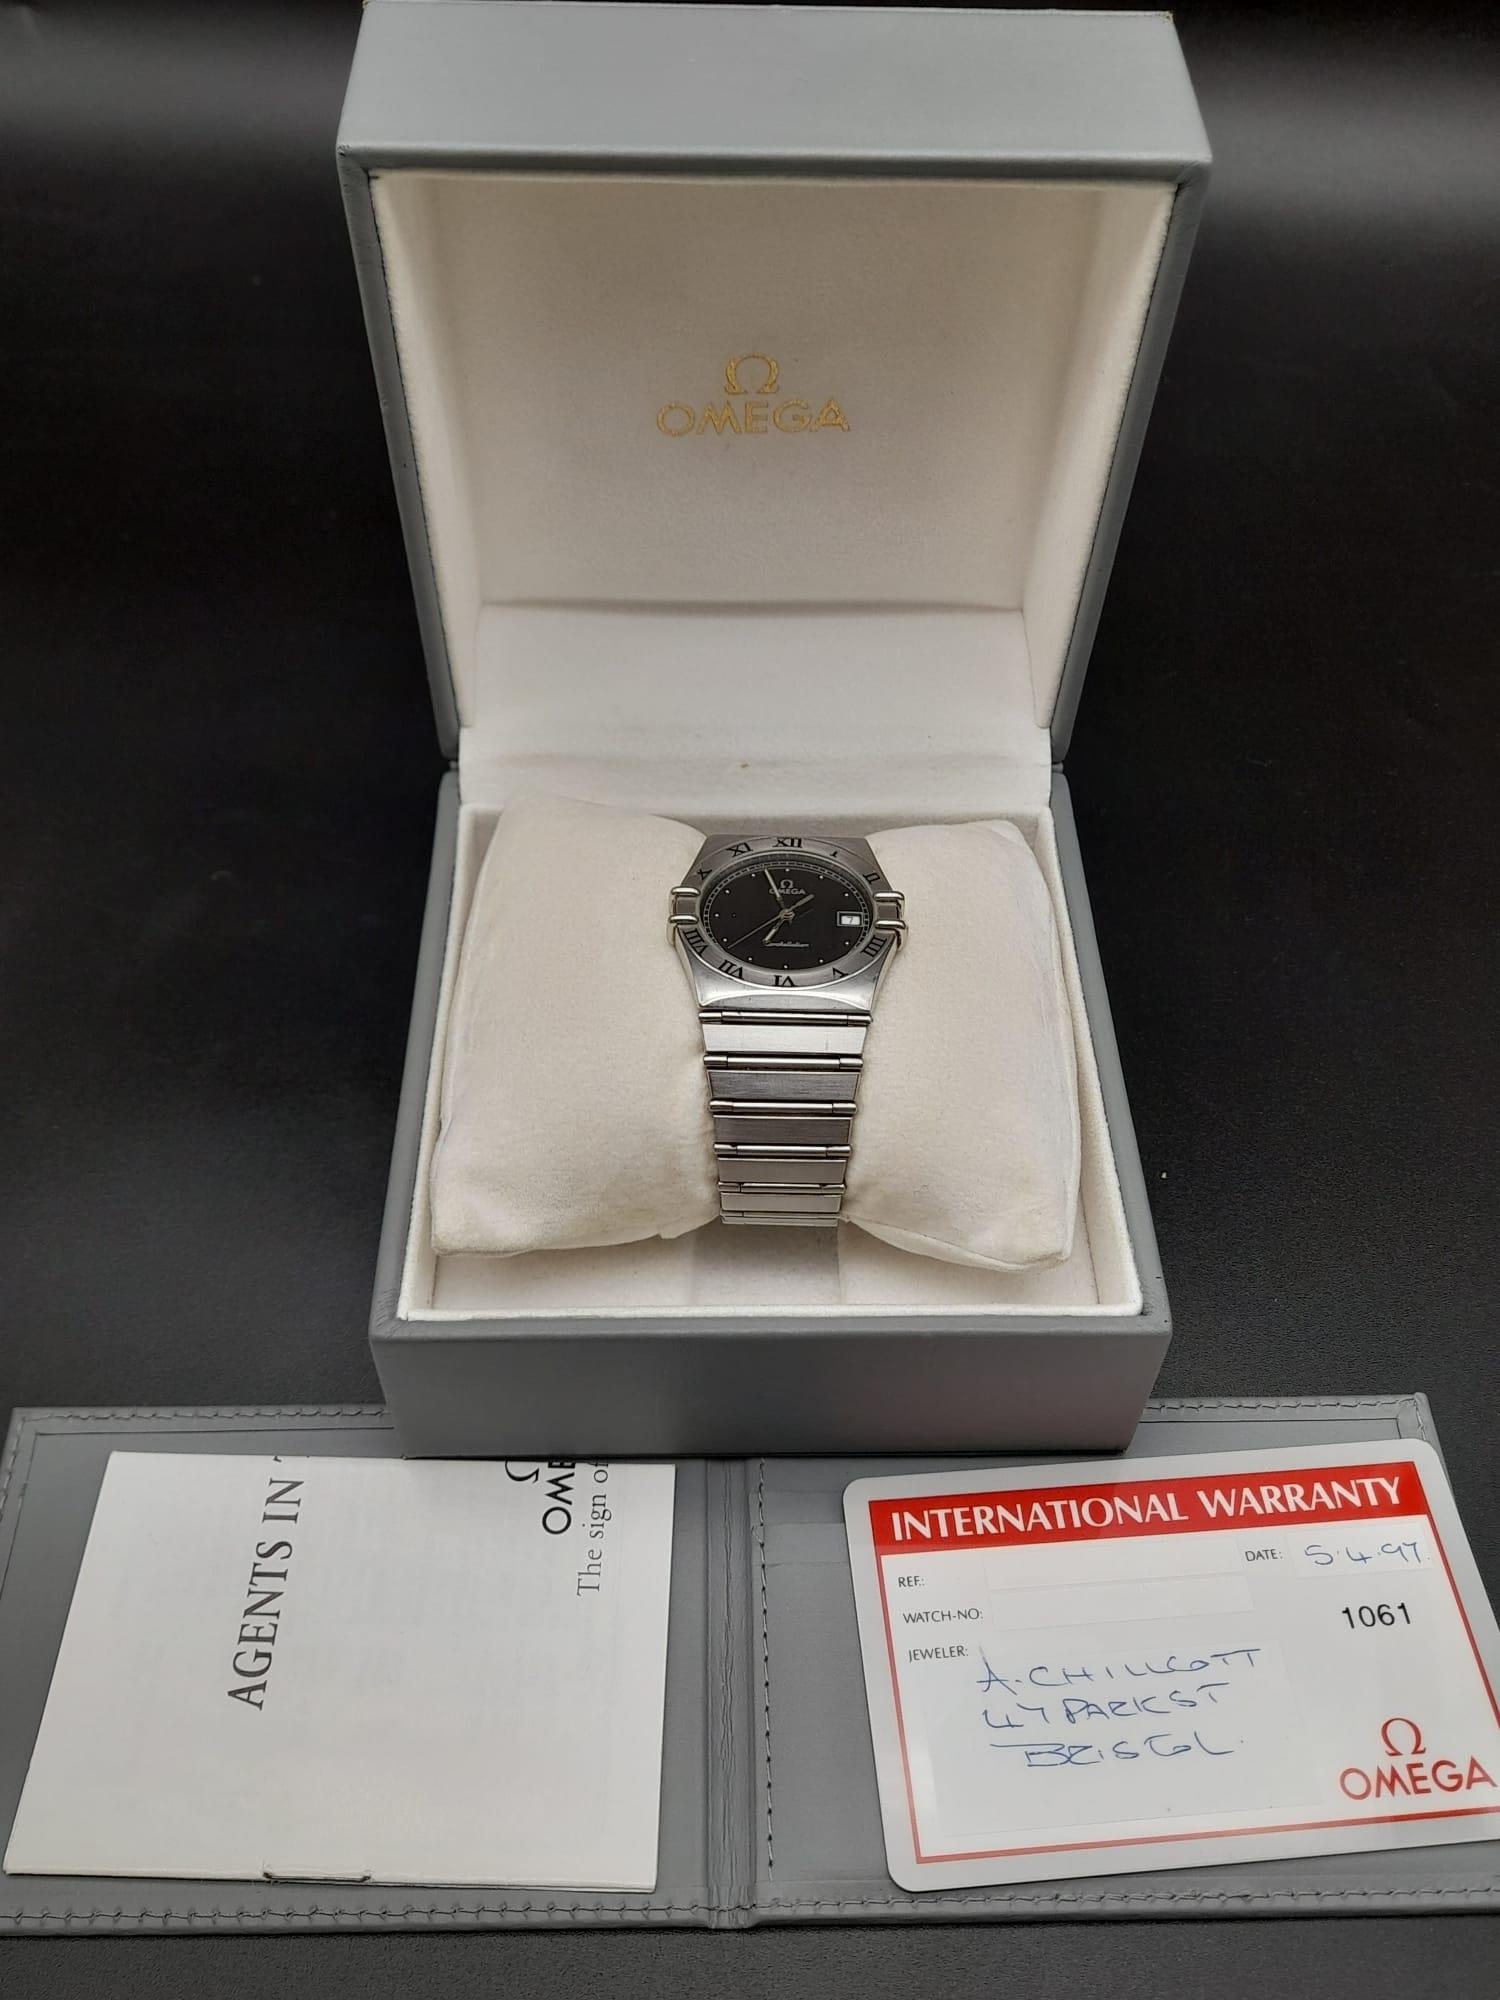 OMEGA CONSTELATION QUARTZ BRACELET WATCH WITH ORIGINAL BOX AND PAPERS. 32mm. Needs batteries. - Image 13 of 13